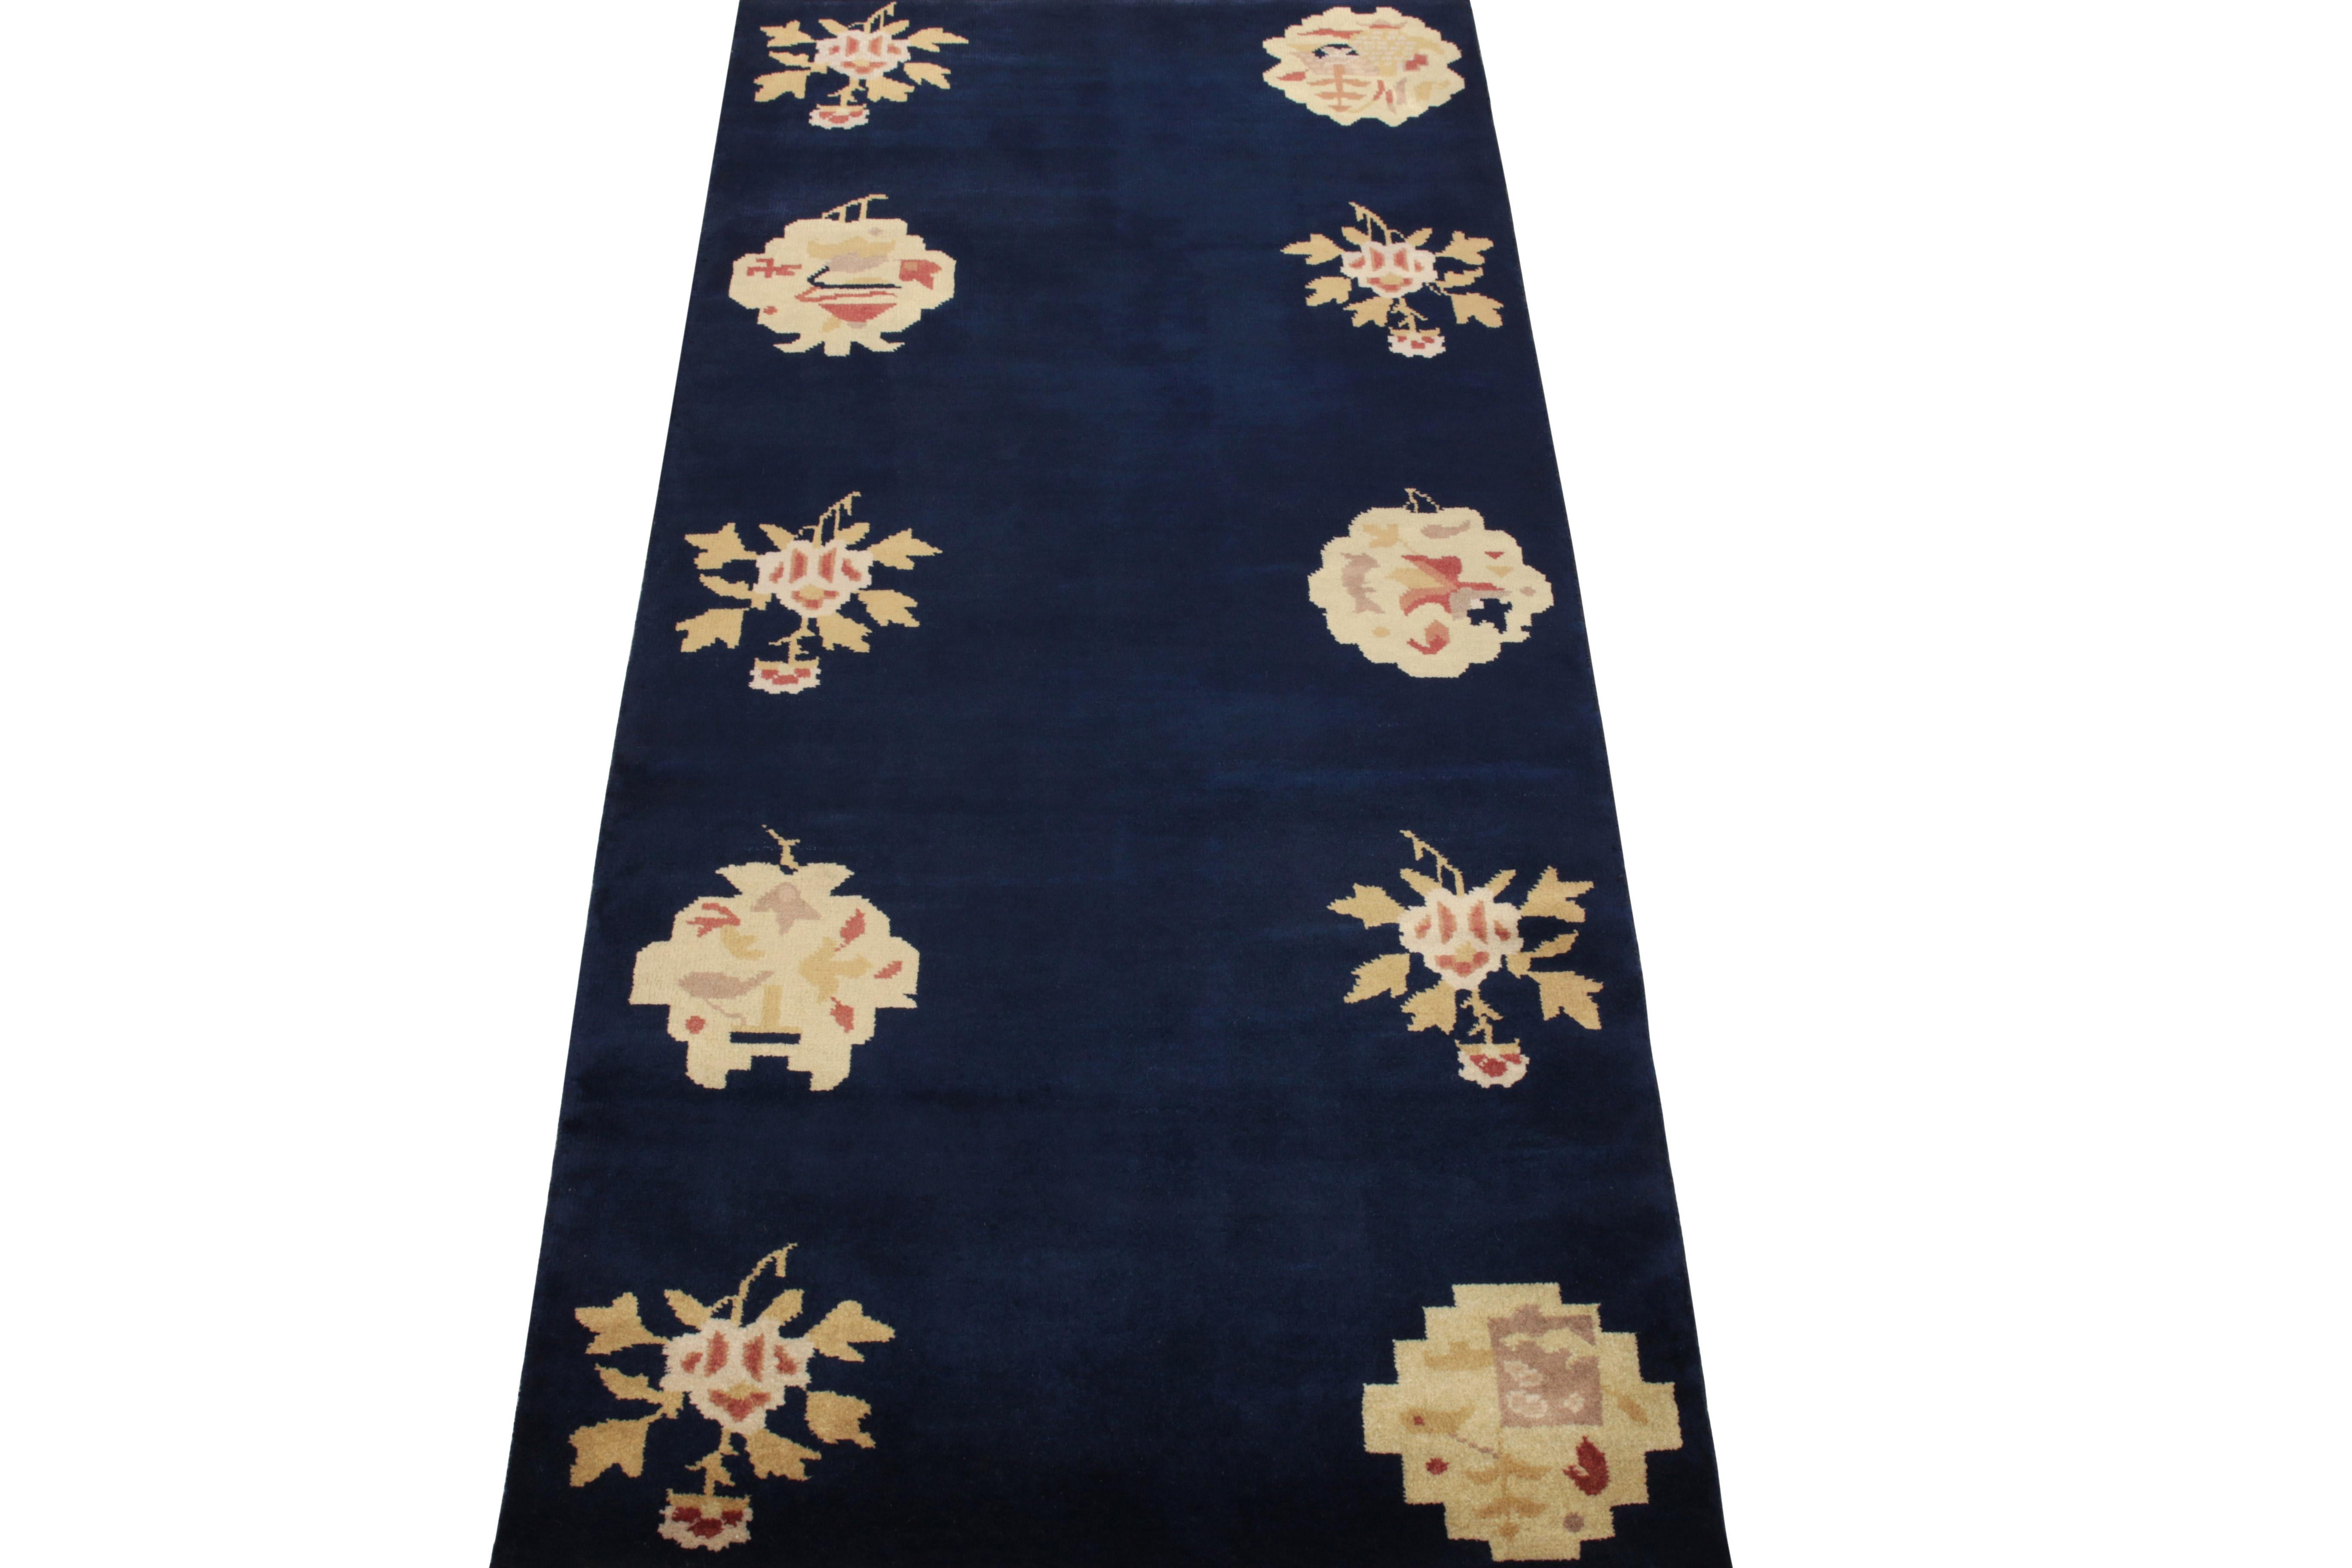 Hand-knotted in wool, this 3x6 vintage ode to Chinese art deco rugs of the 1920s features a series of alternating floral designs in subtle golden-beige, carrot red with light purple on a lush blue backdrop carrying light-dark spots further